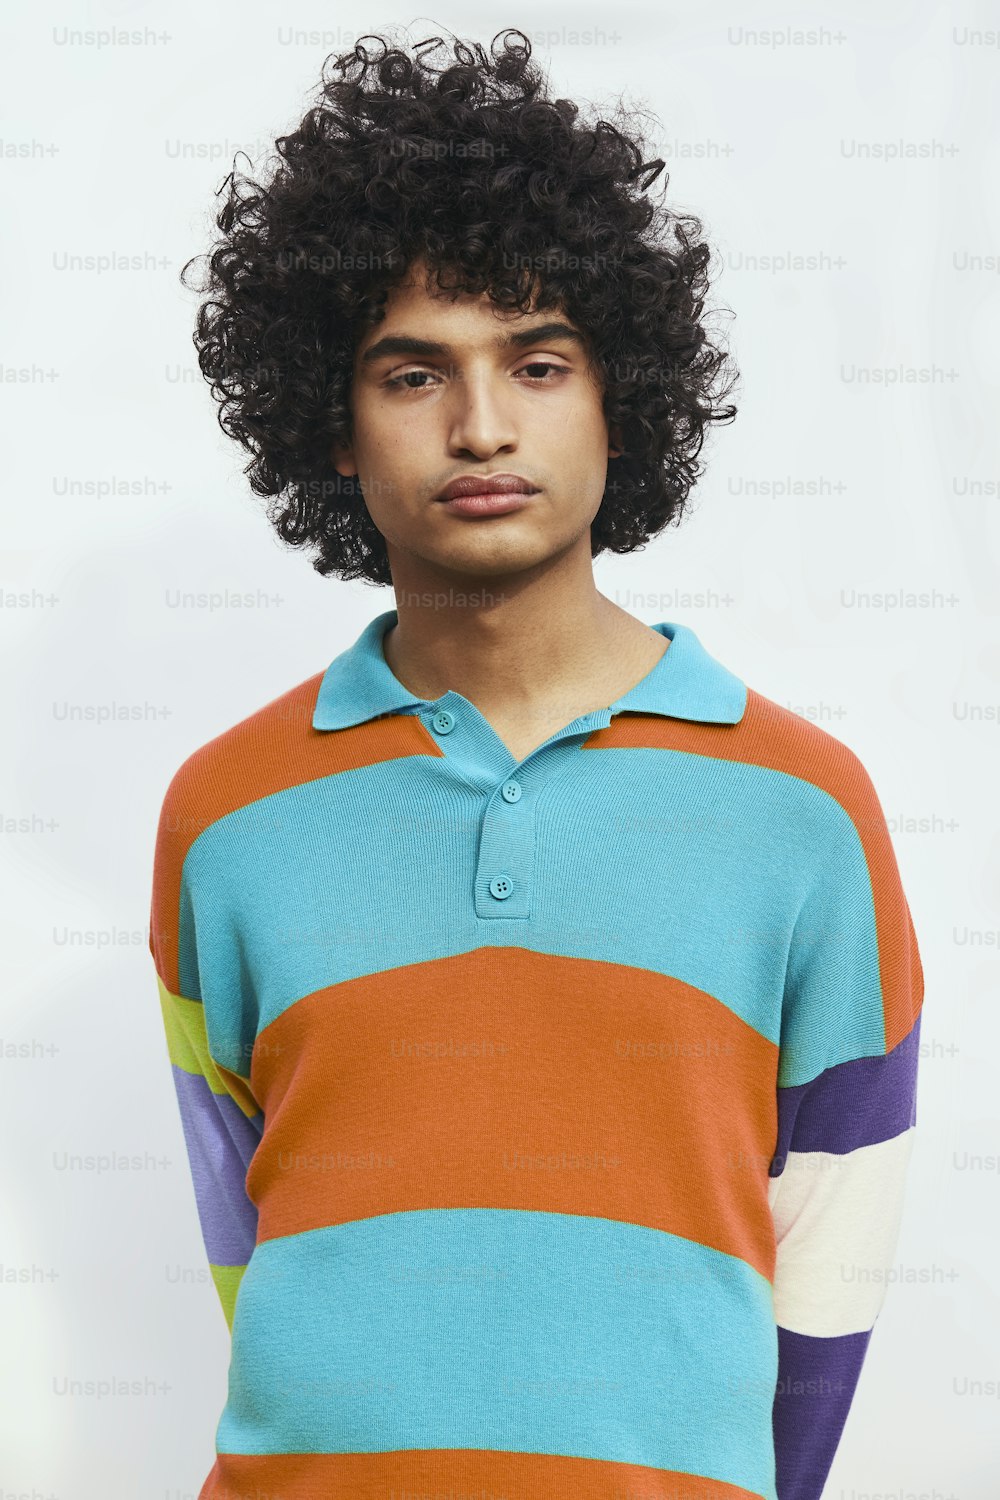 a young man with curly hair wearing a colorful shirt